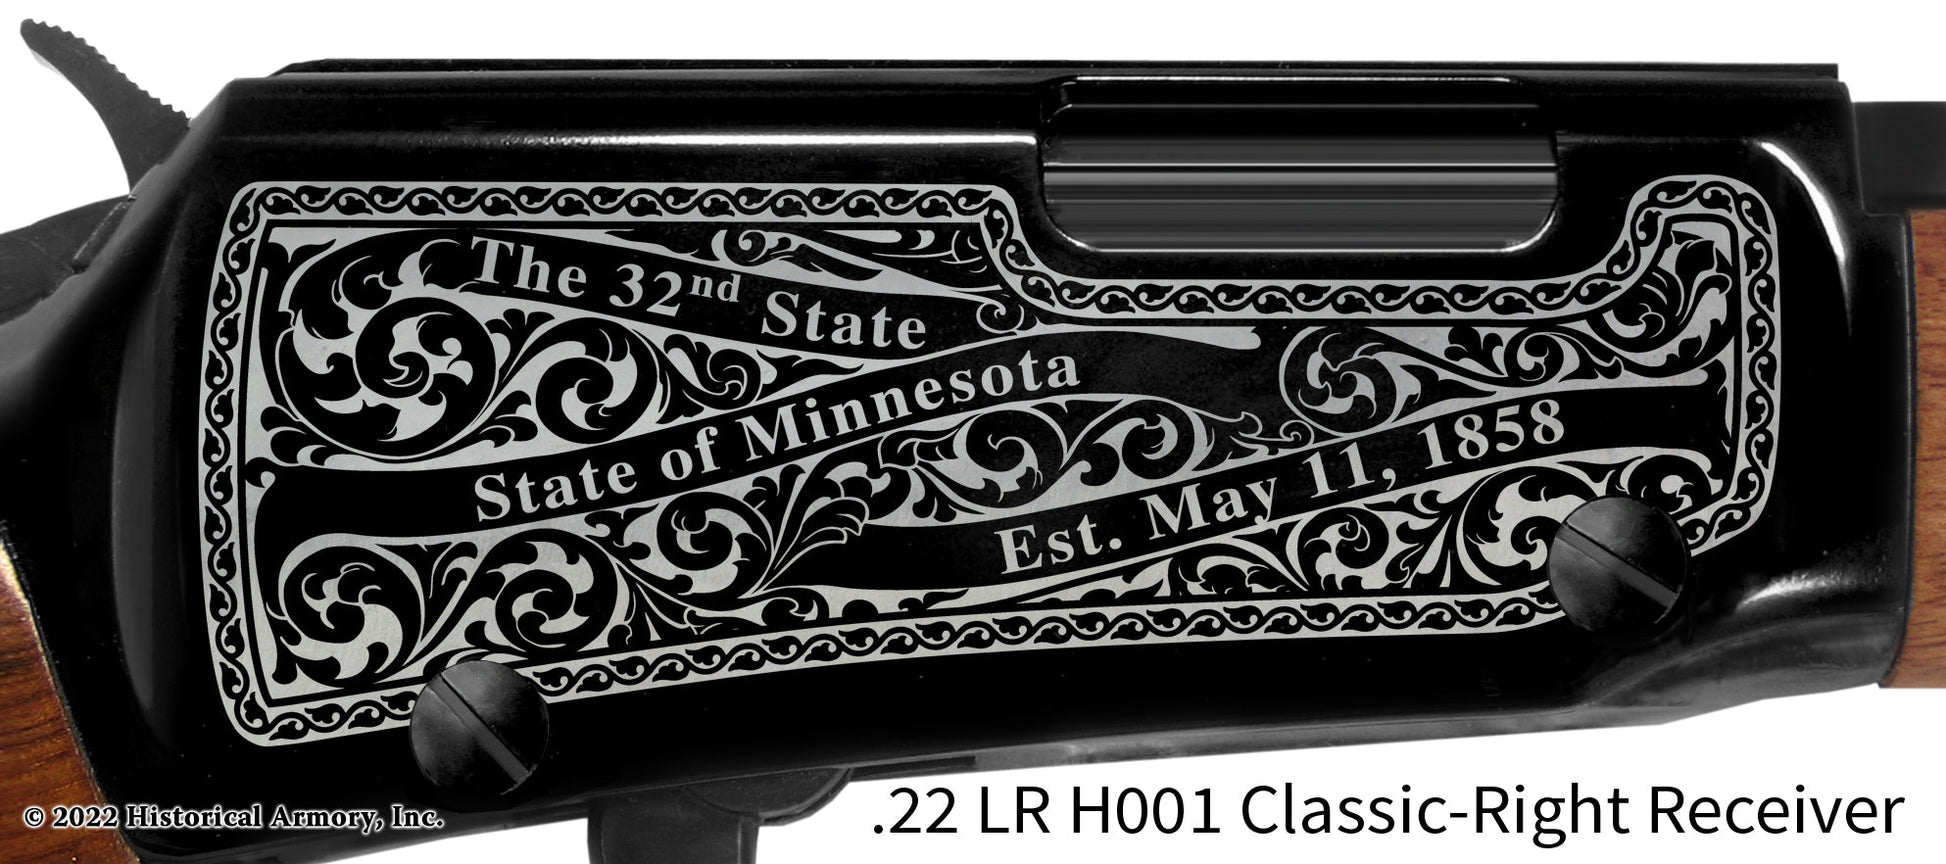 Cass County Minnesota Engraved Henry H001 Rifle